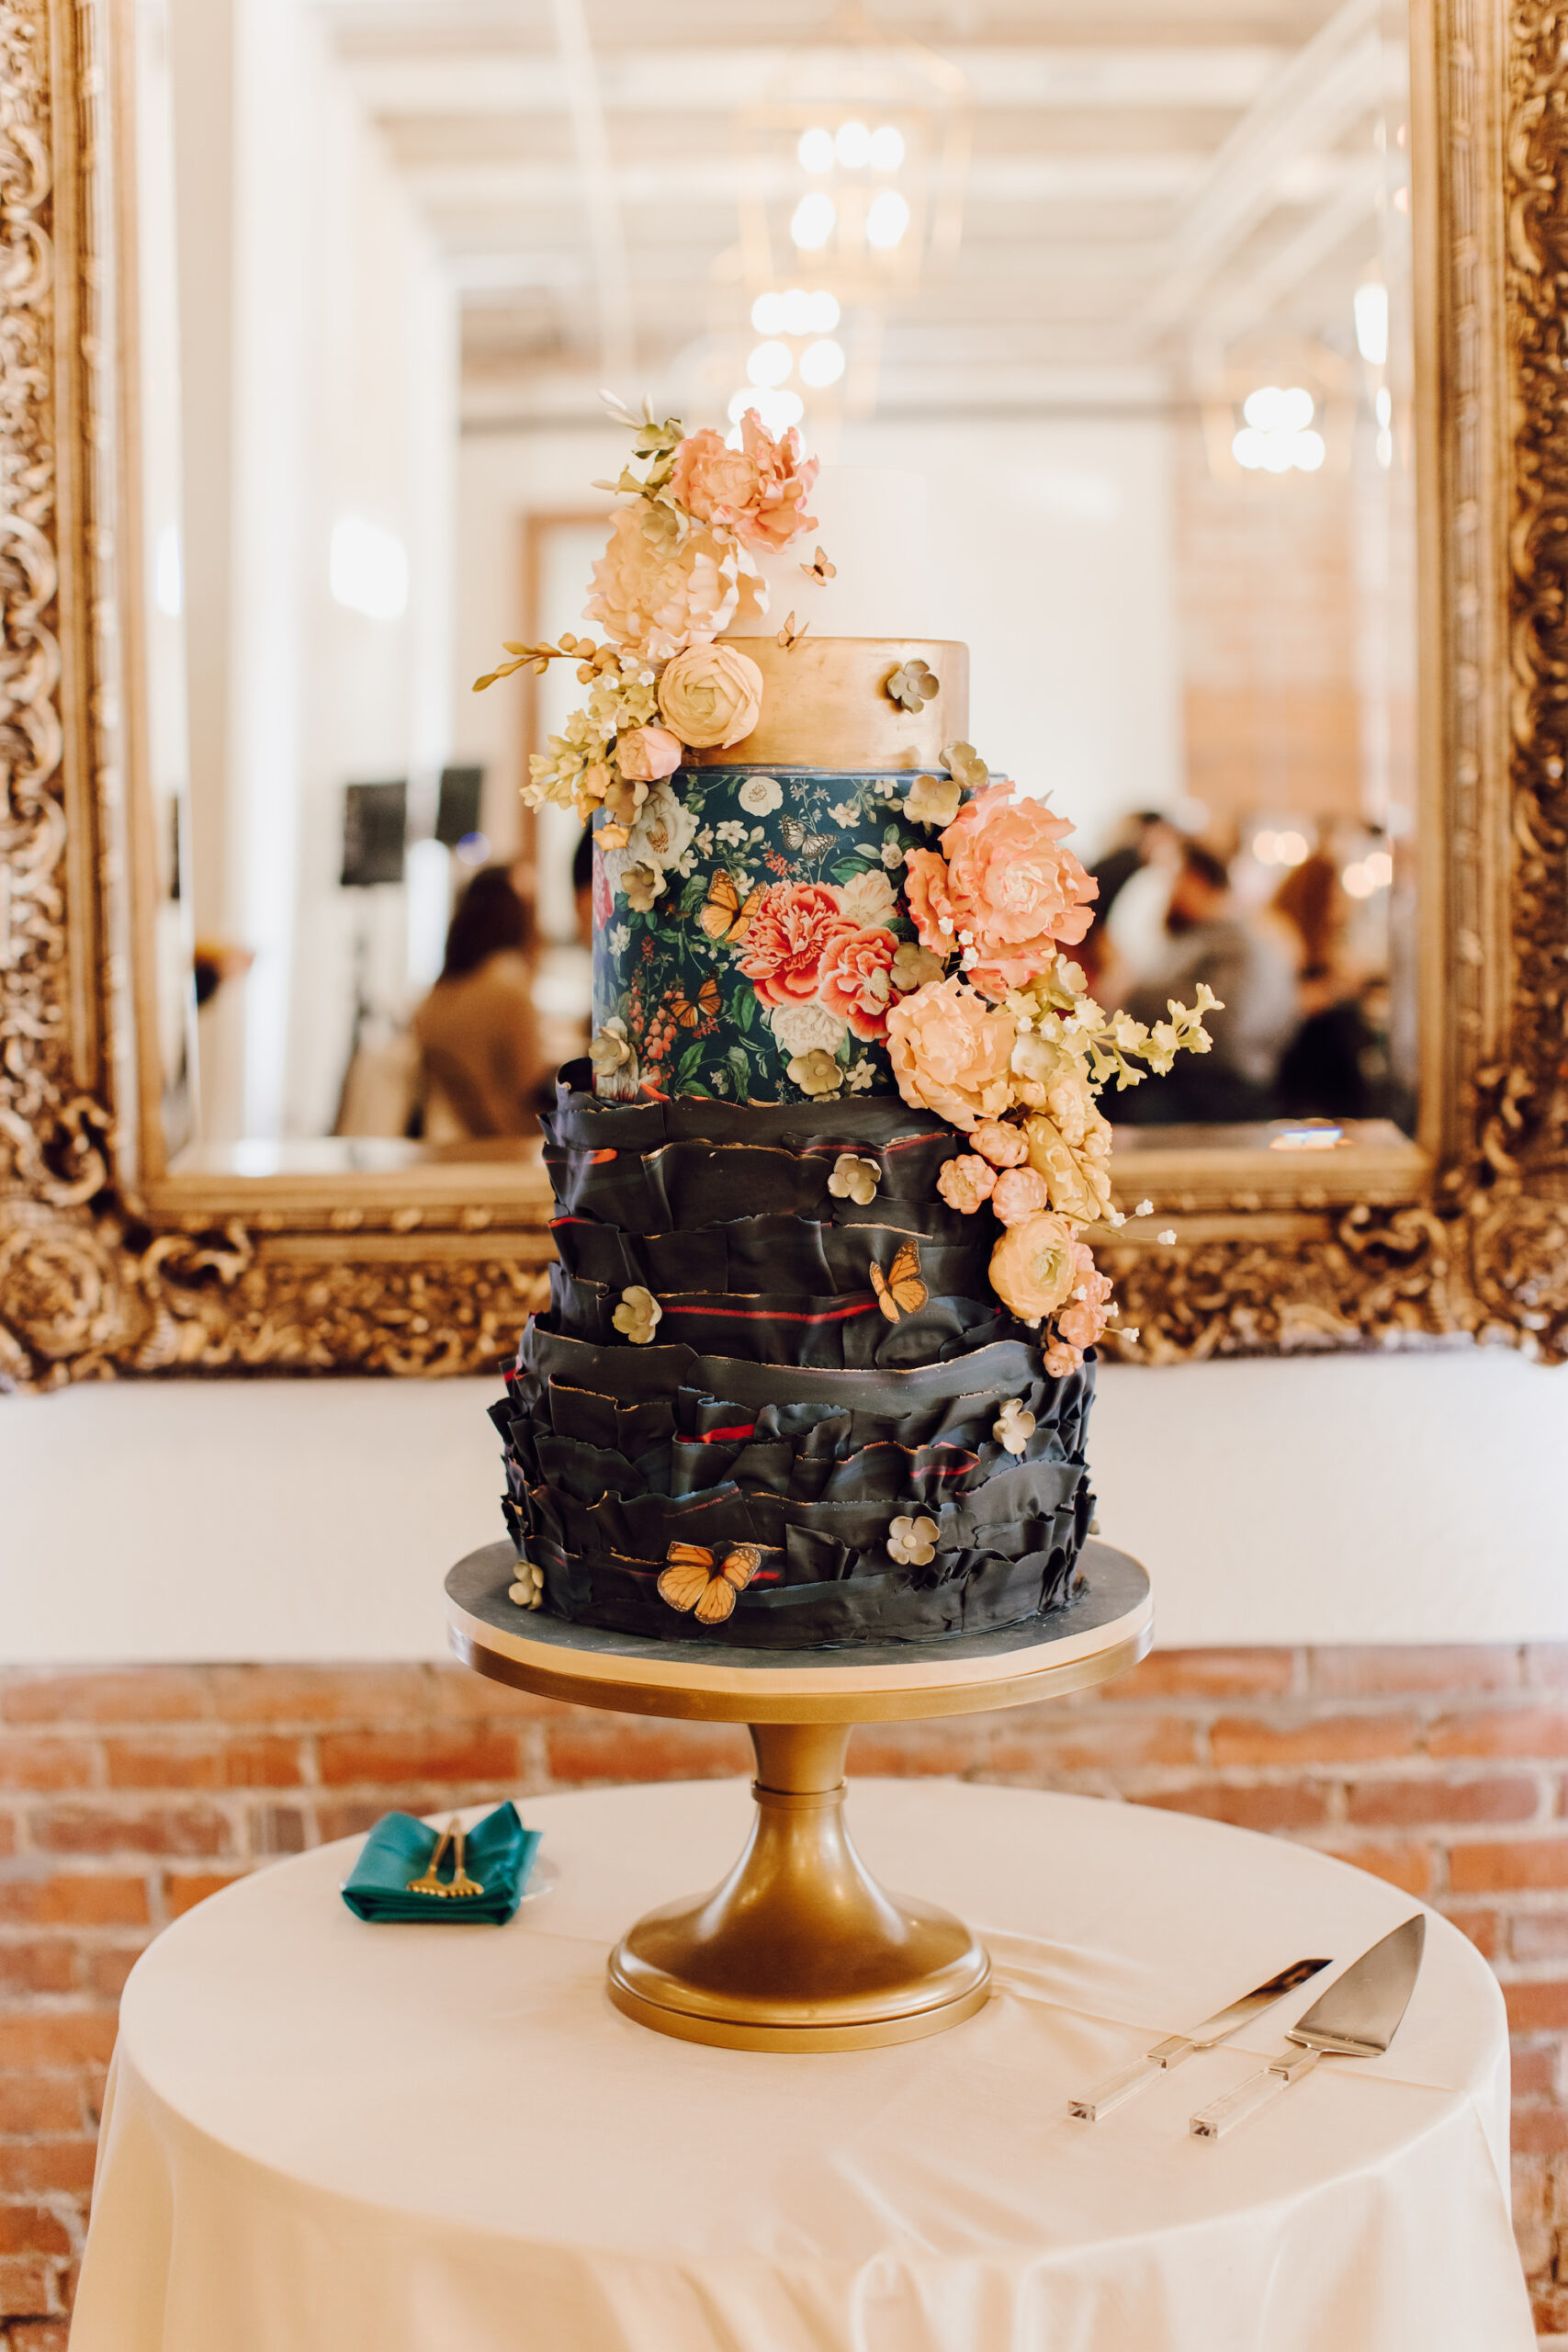 Whimsical Four-tiered Wedding Cake with Black Fondant and Edible Flowers Inspiration